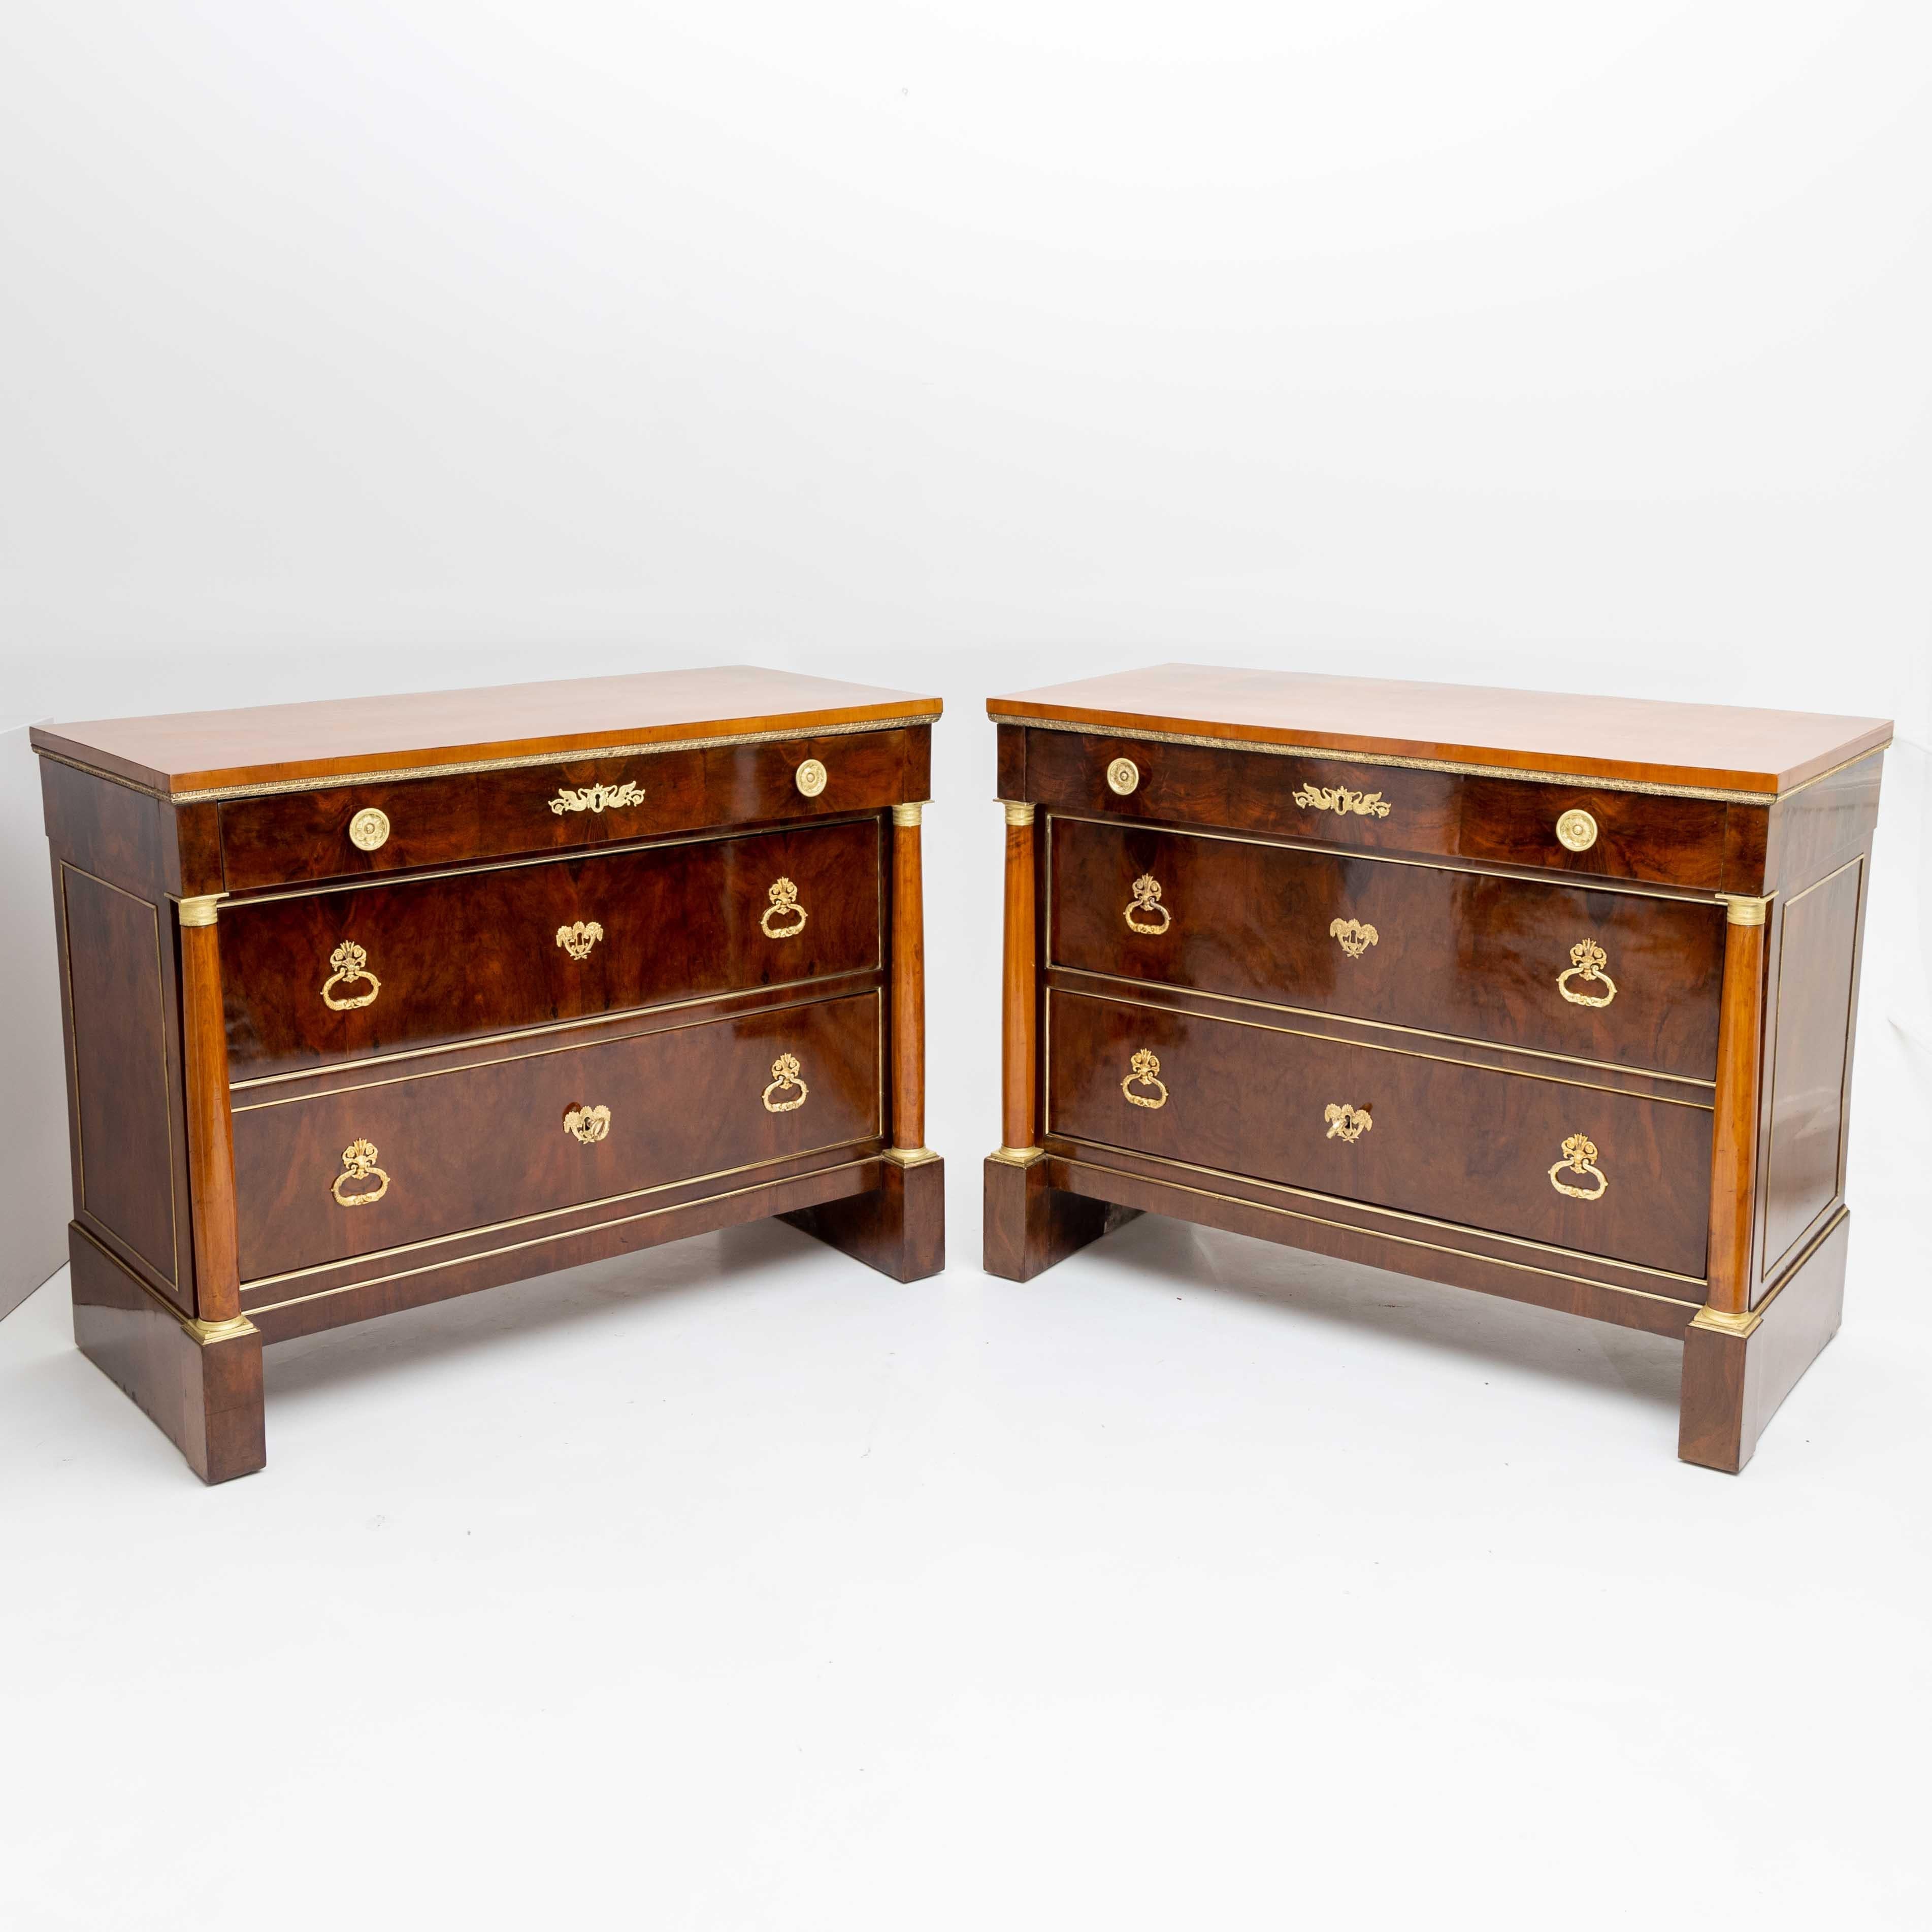 This pair of Empire chest of drawers showcases three drawers, accompanied by lateral columns adorned with fire-gilt bronze bases and capitals. Notably, the top drawer extends slightly, finding support on the columns themselves. Standing on the